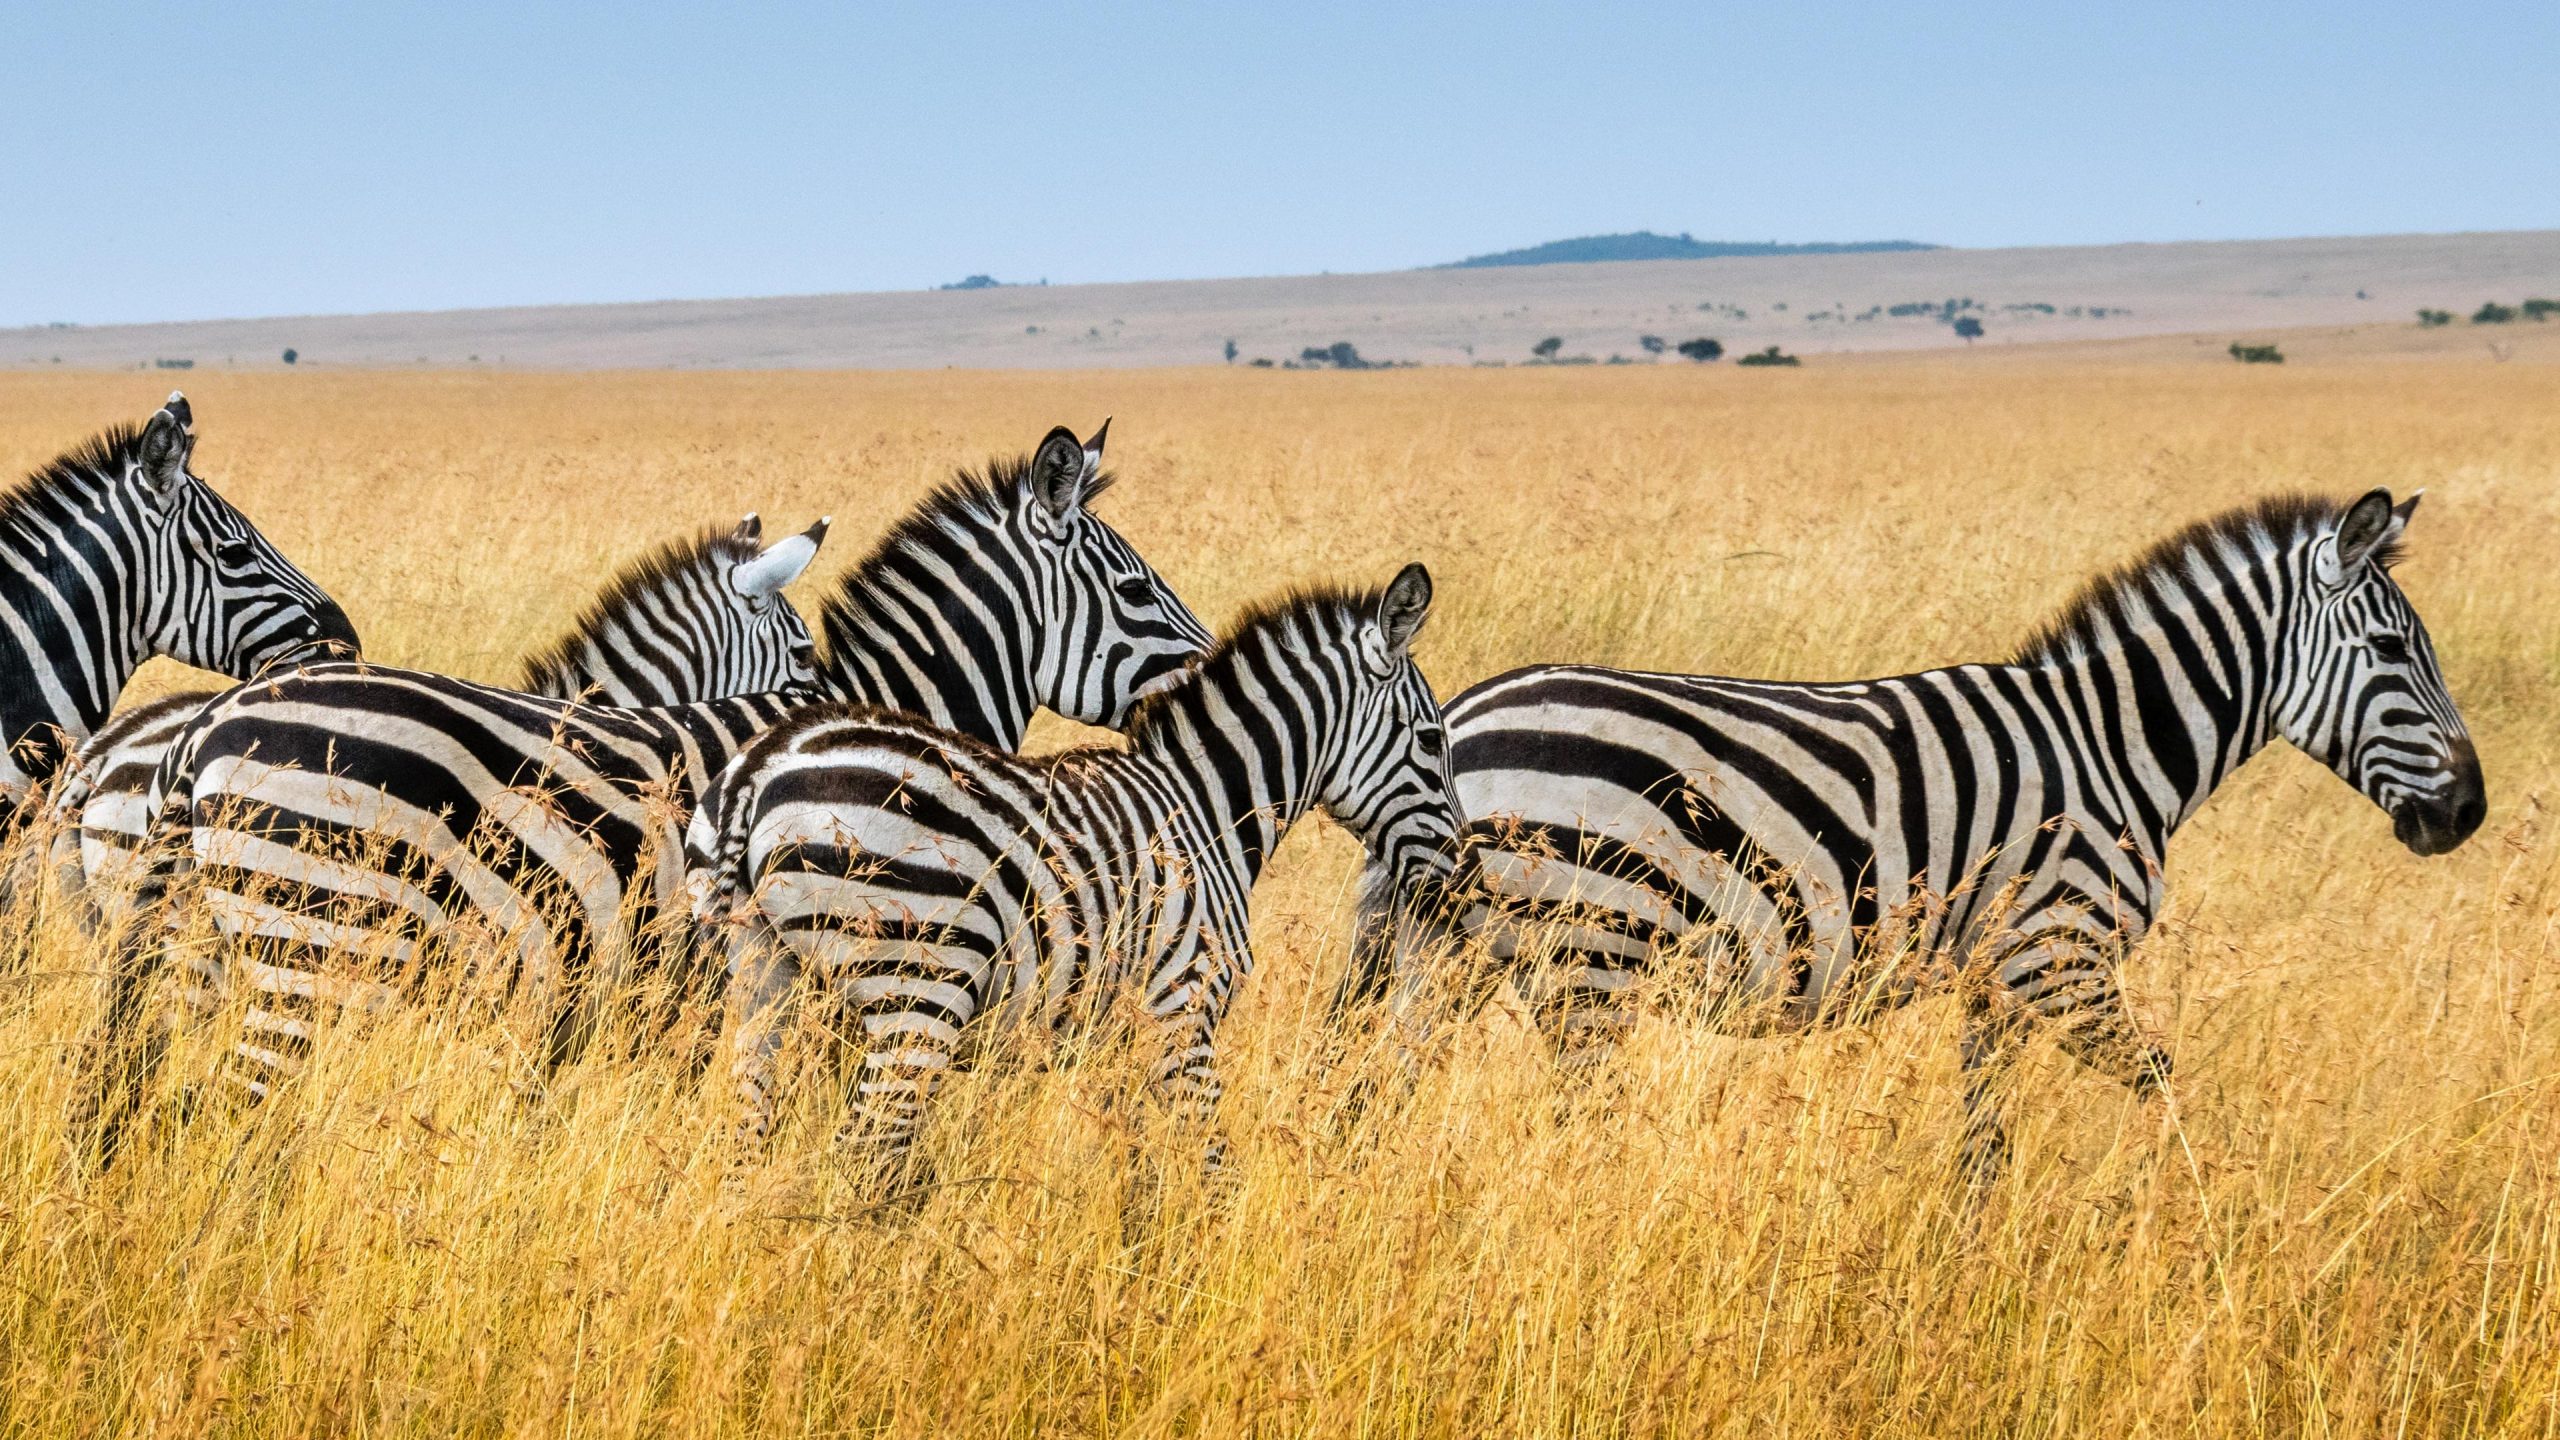 The Mystery Of Why Zebras Have Their Stripes Has Baffled Scientists Now A Dazzling Answer